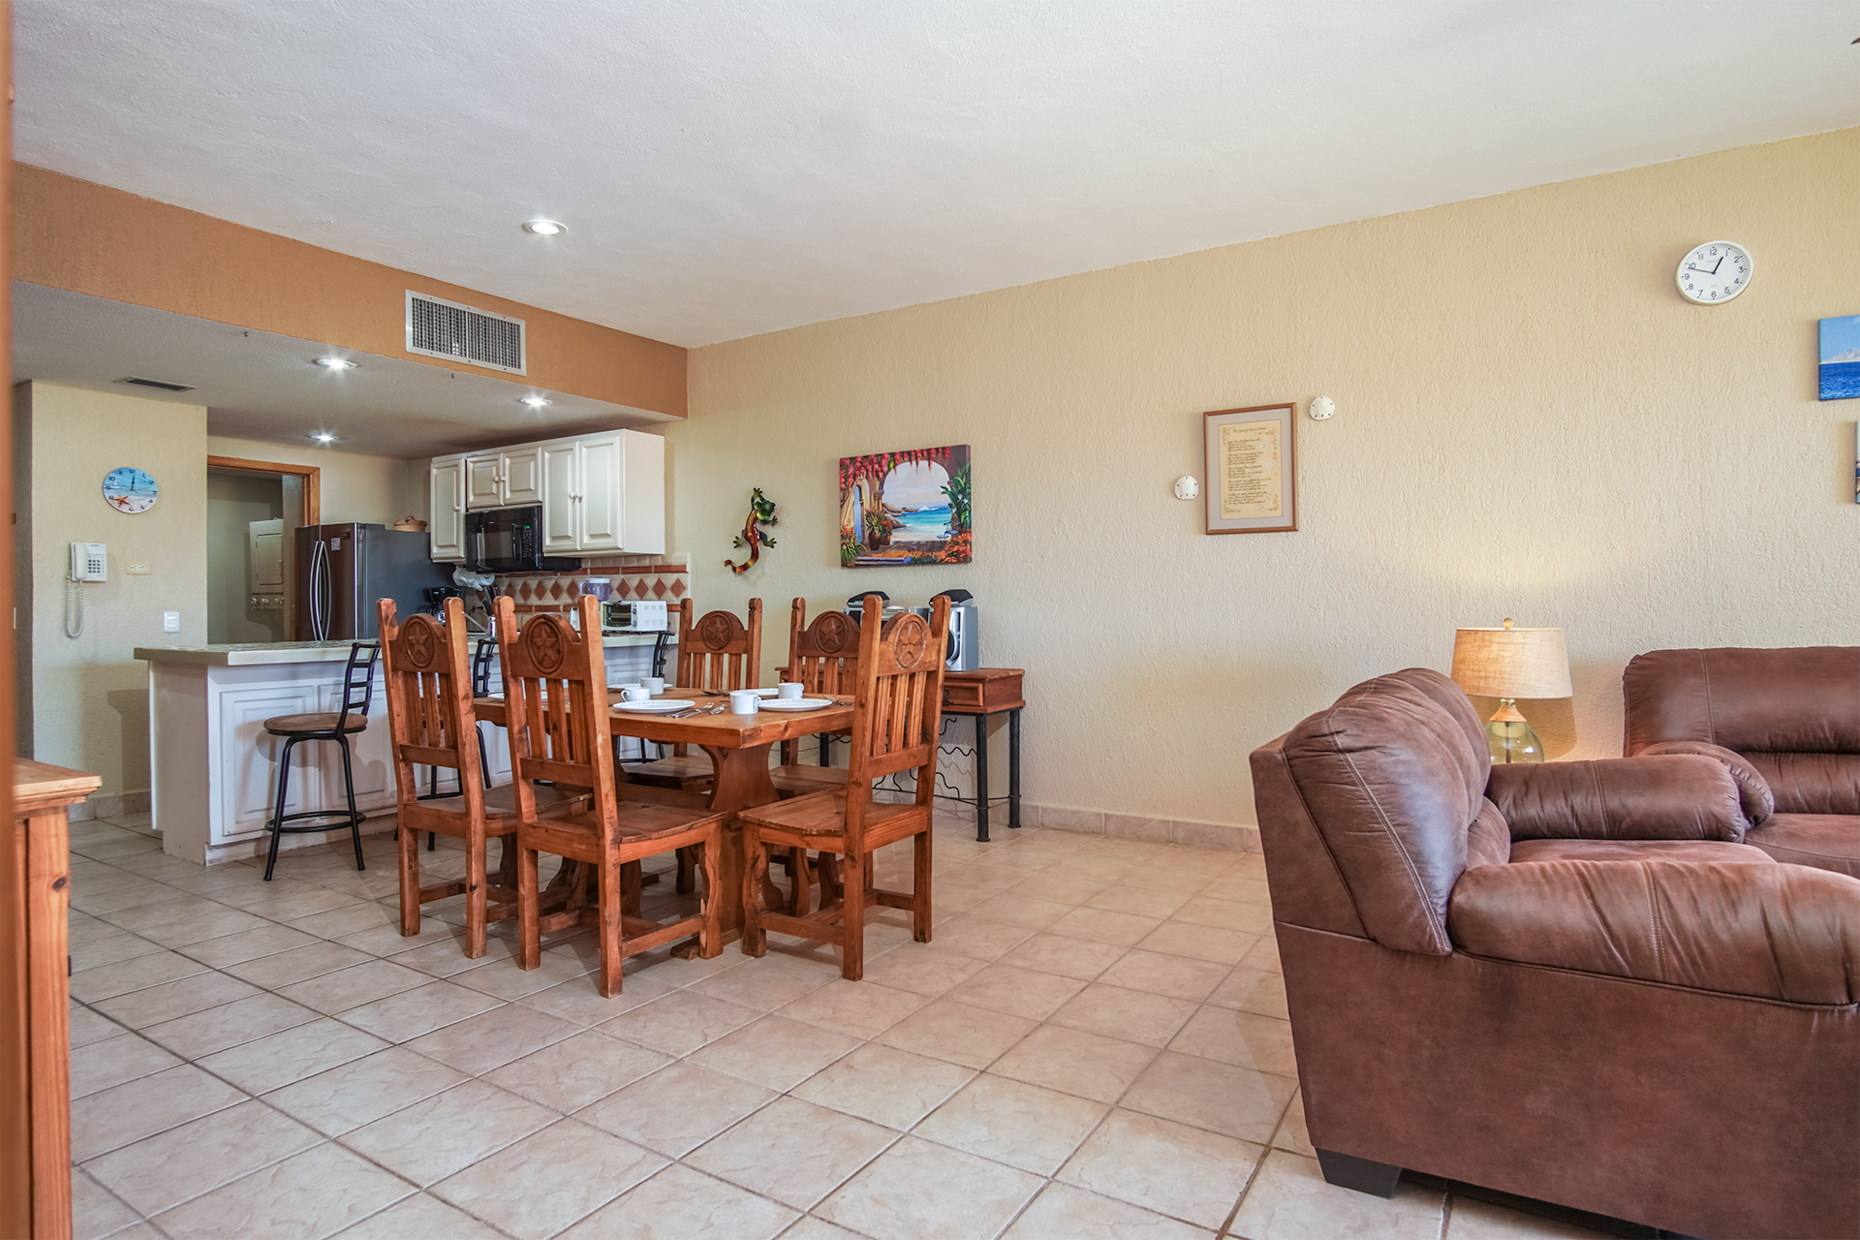 Lots of space in this two bedroom condominium.